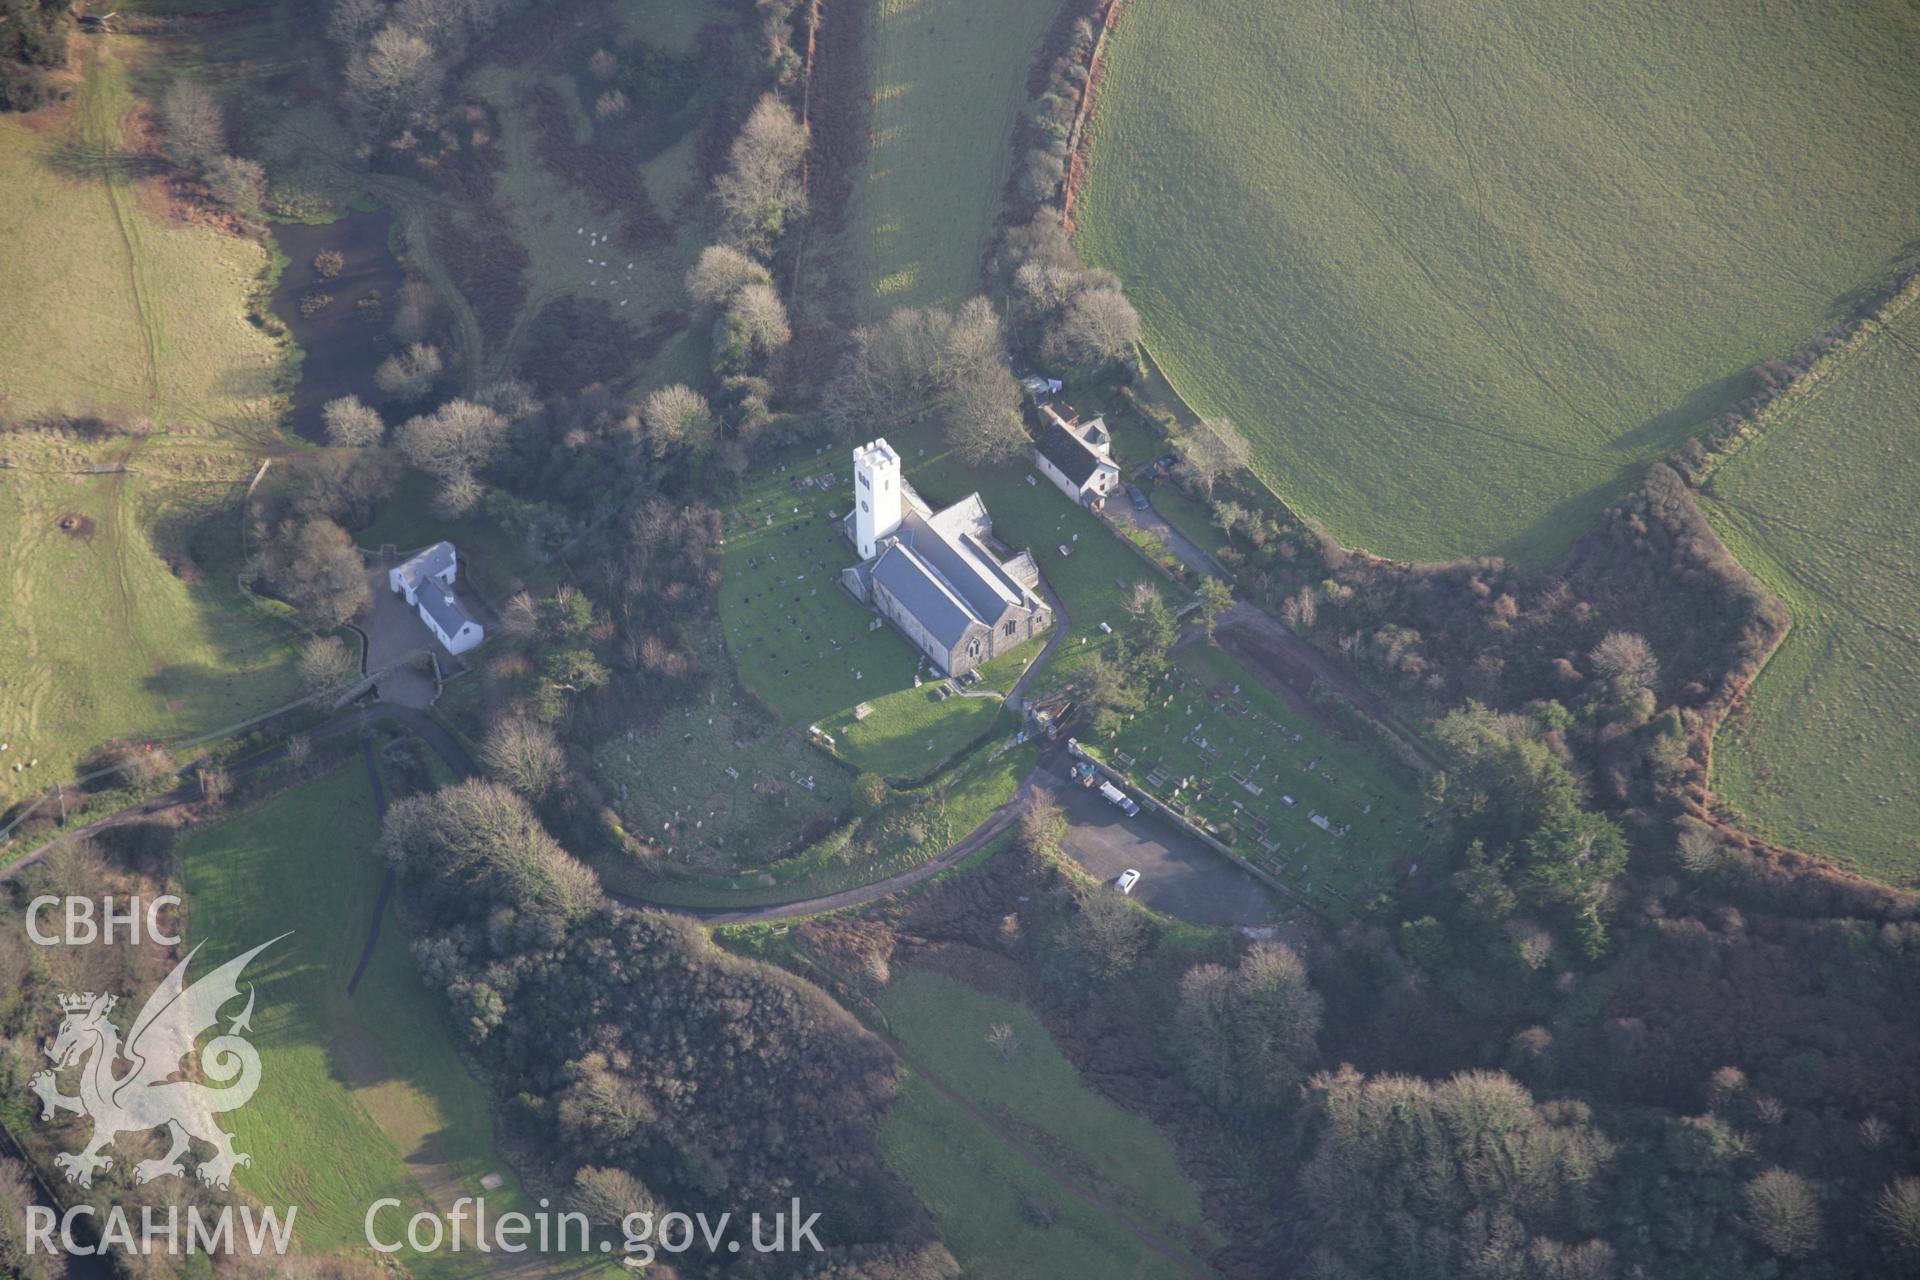 RCAHMW colour oblique aerial photograph of St James' Church, Manorbier, from the west. Taken on 11 January 2006 by Toby Driver.